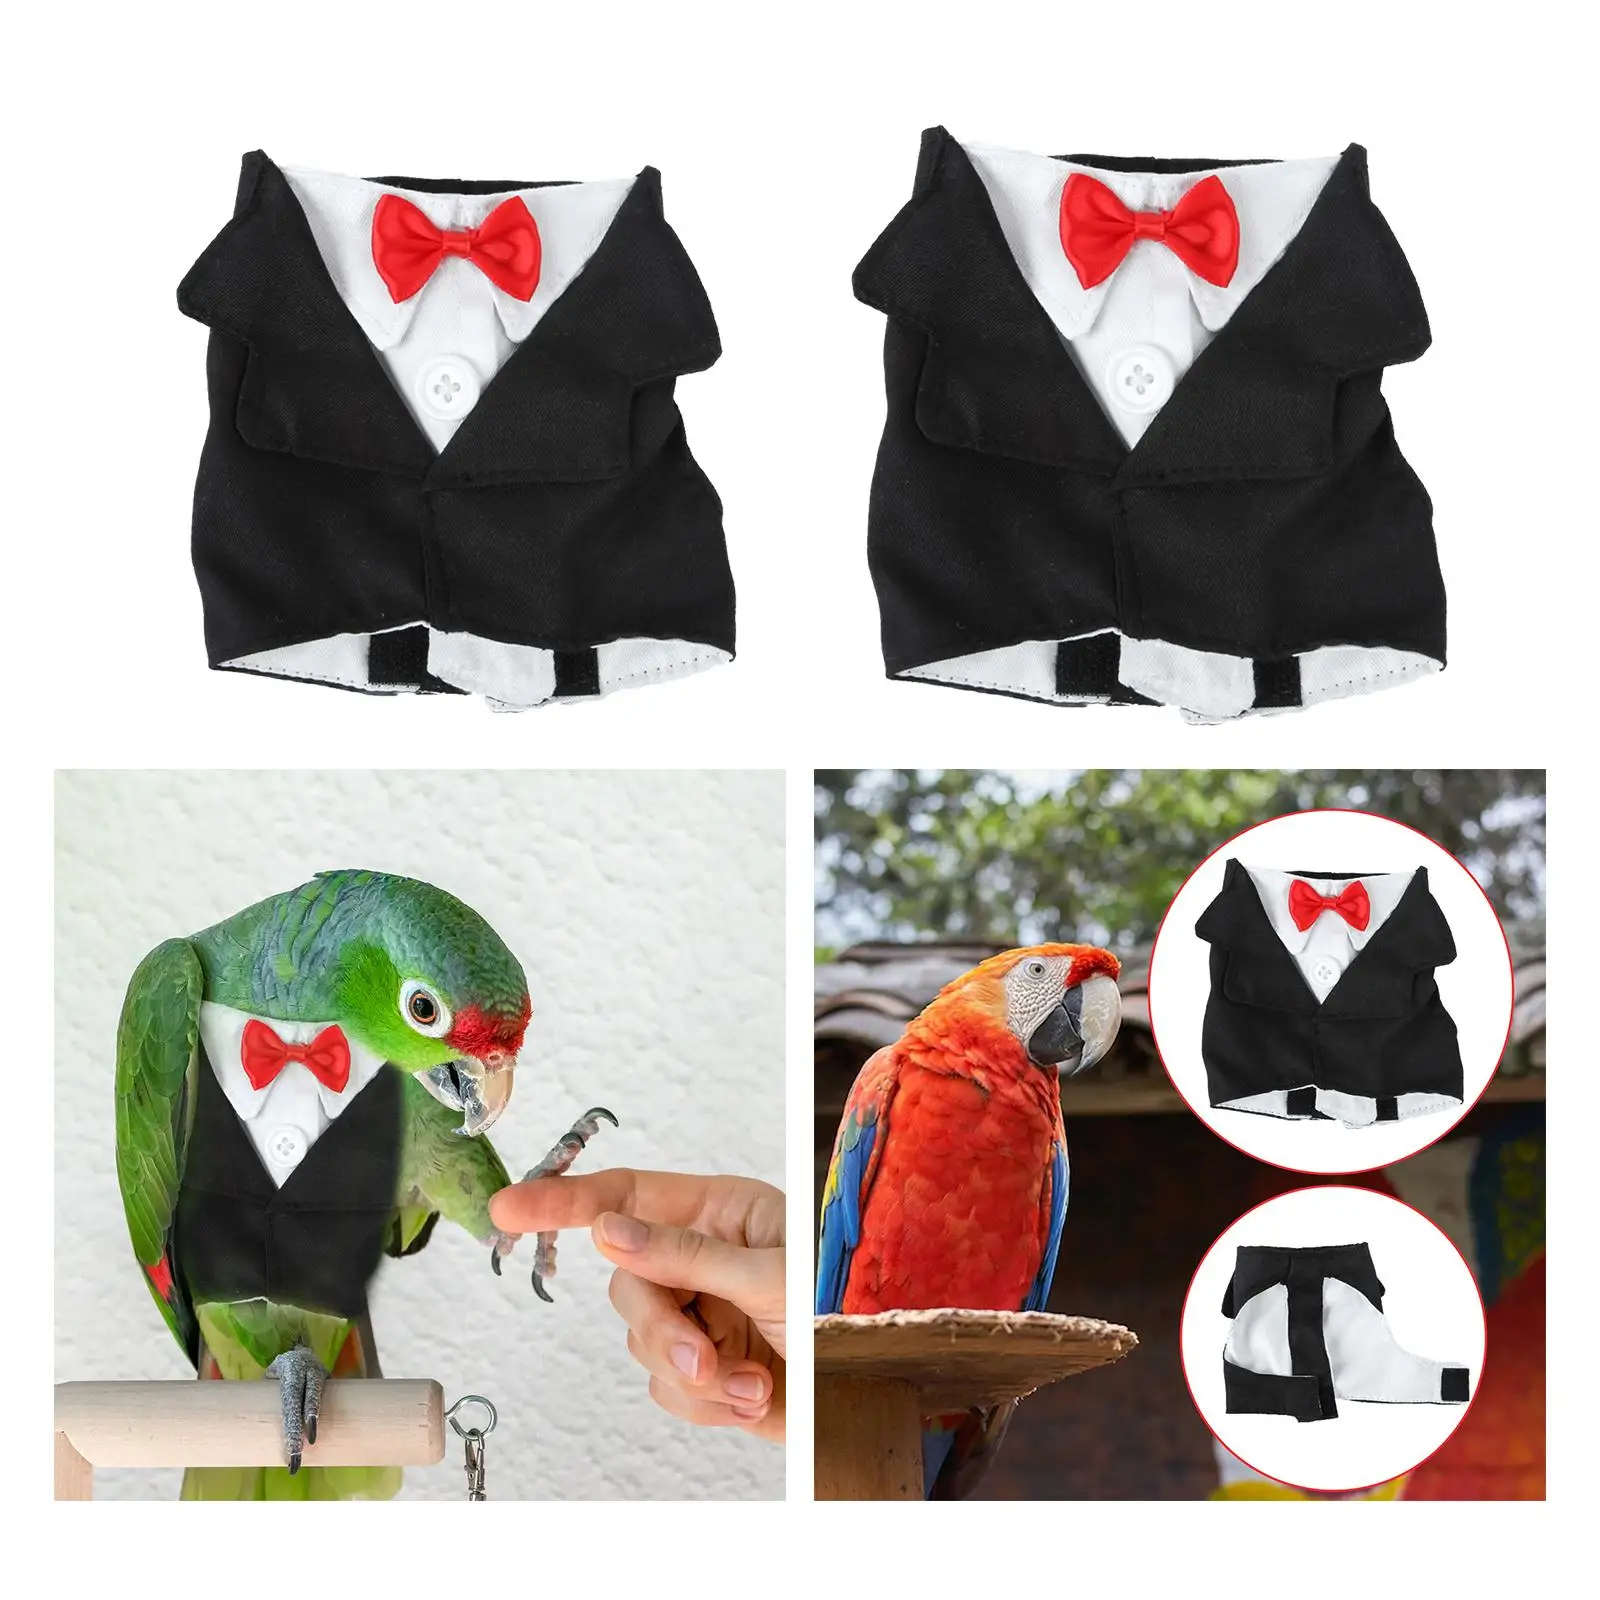 Reusable Birds Clothes Cosplay Pets Supplies Bird Accessories Costume with Bow Tie Parrots Suit Uniform for African Greys Budgie